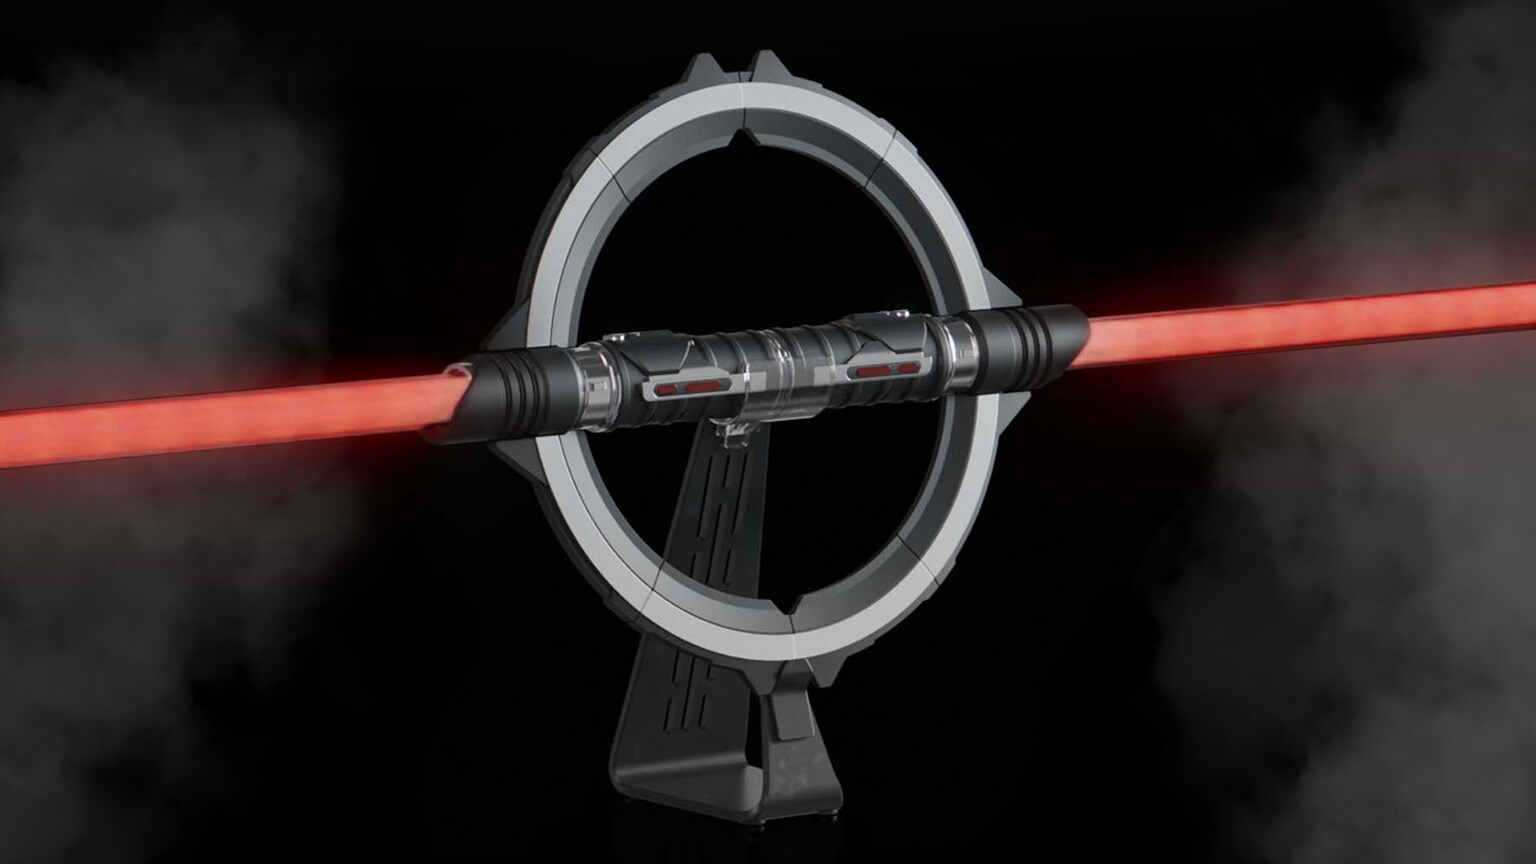 HasLab Looks to Bring Reva's Lightsaber to Our Galaxy